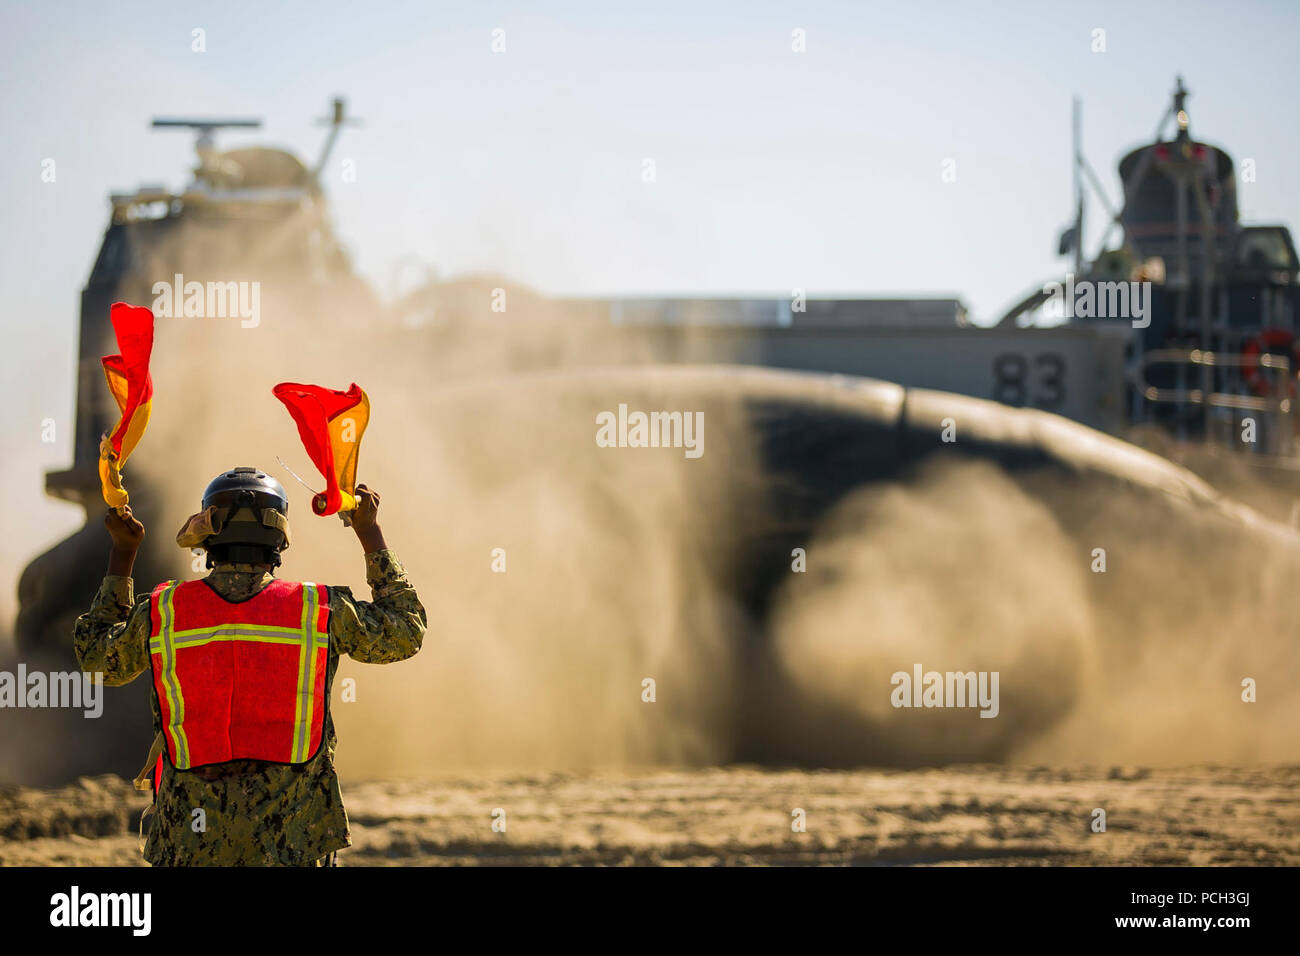 CAMP LEJEUNE, N.C. (Nov. 5, 2017) A U.S. Navy Sailor signals Landing Craft, Air Cushion 83, to embark on the amphibious assault ship USS Iwo Jima (LHD-7) as part of a Composite Training Unit Exercise (COMPTUEX) at Onslow Beach. The 26th Marine Expeditionary Unit (MEU) is conducting a COMPTUEX in preparation for an upcoming deployment at sea. Stock Photo